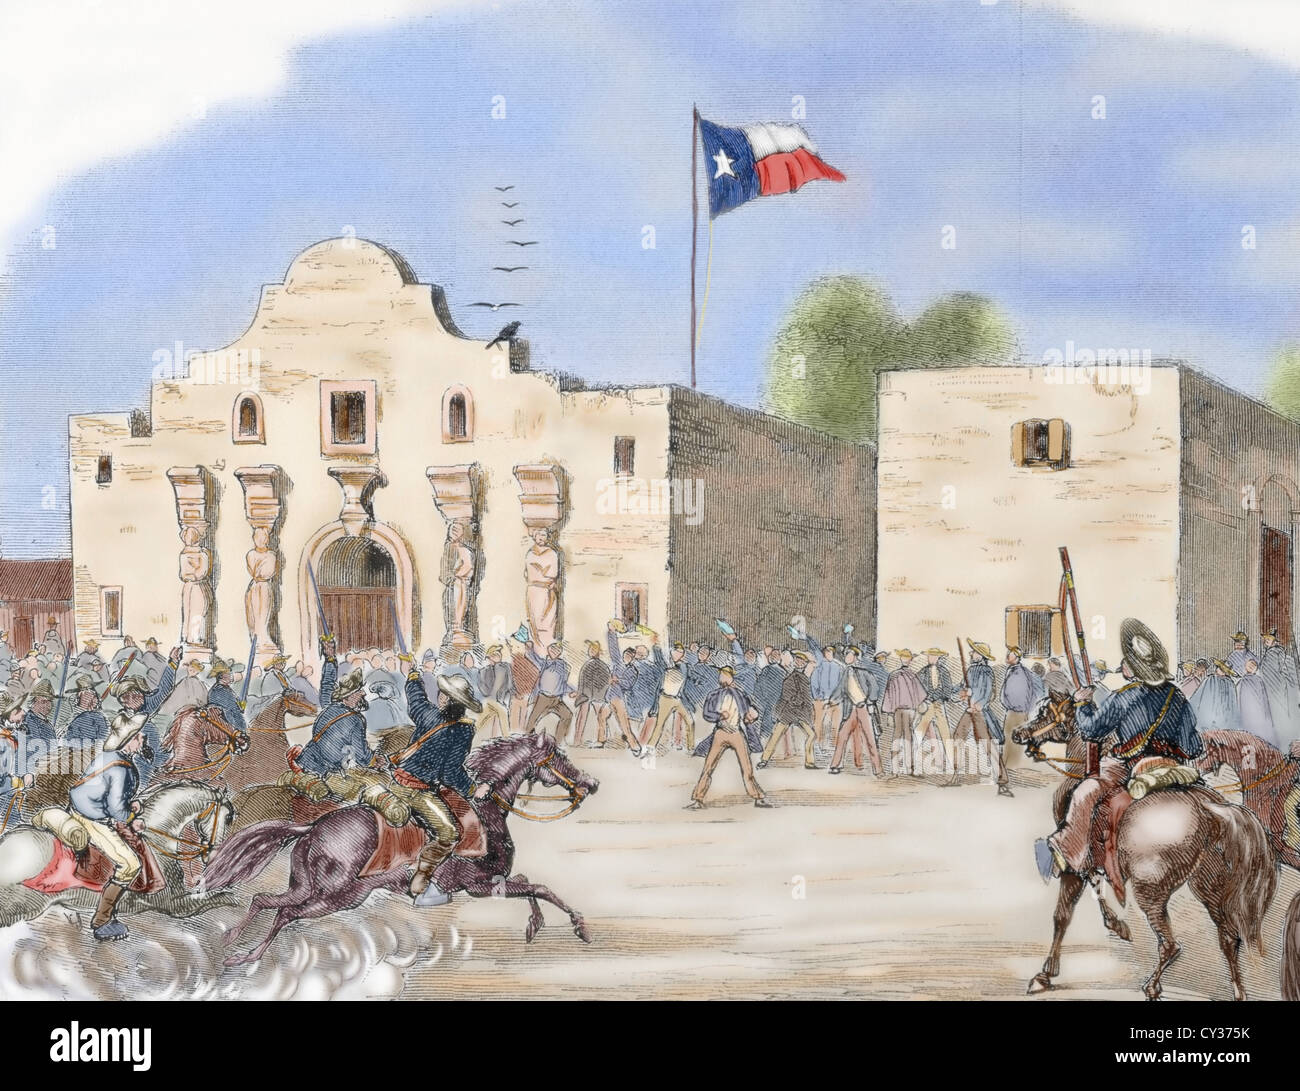 USA. Annexation of Texas. exas State Flag waving over The Alamo, San Antonio, after being admitted to the Union. Stock Photo